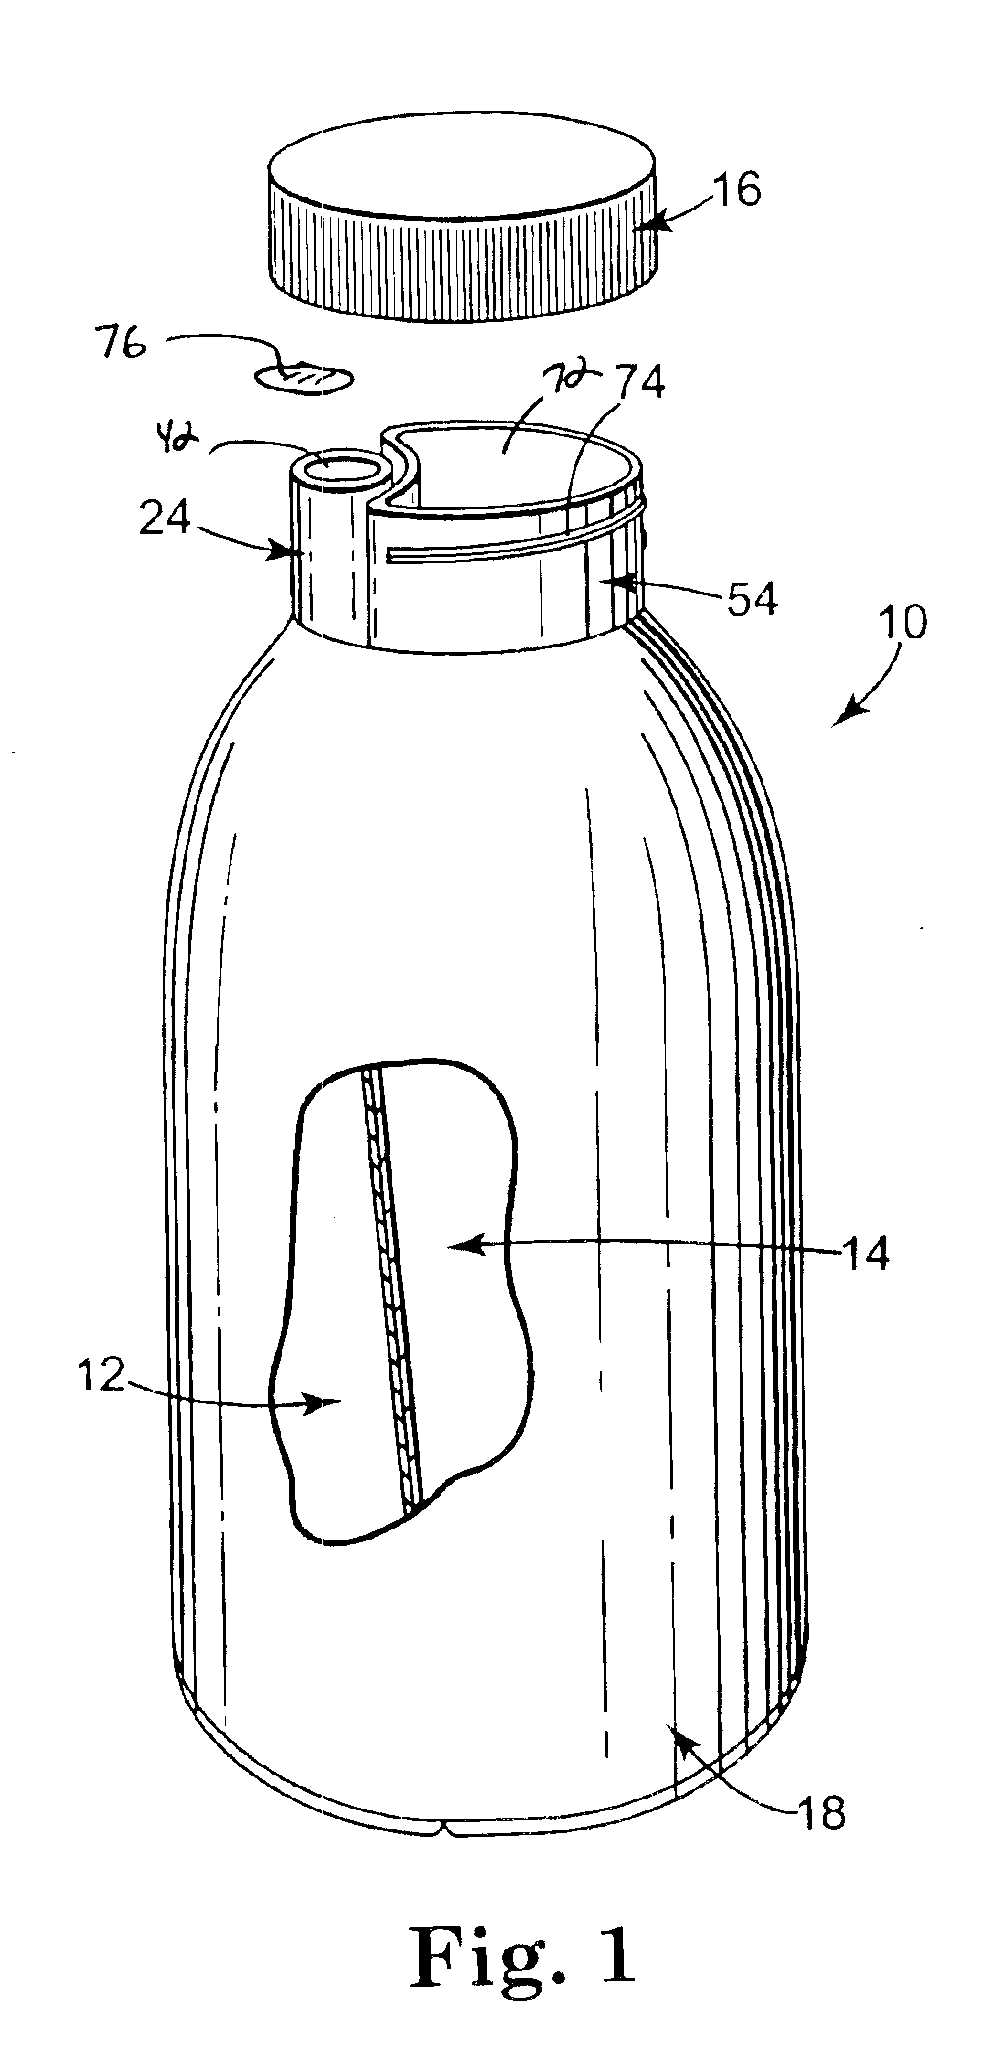 Portable, side-by-side compartment container and method for separately storing and dispensing two consumable products, especially cereal and milk